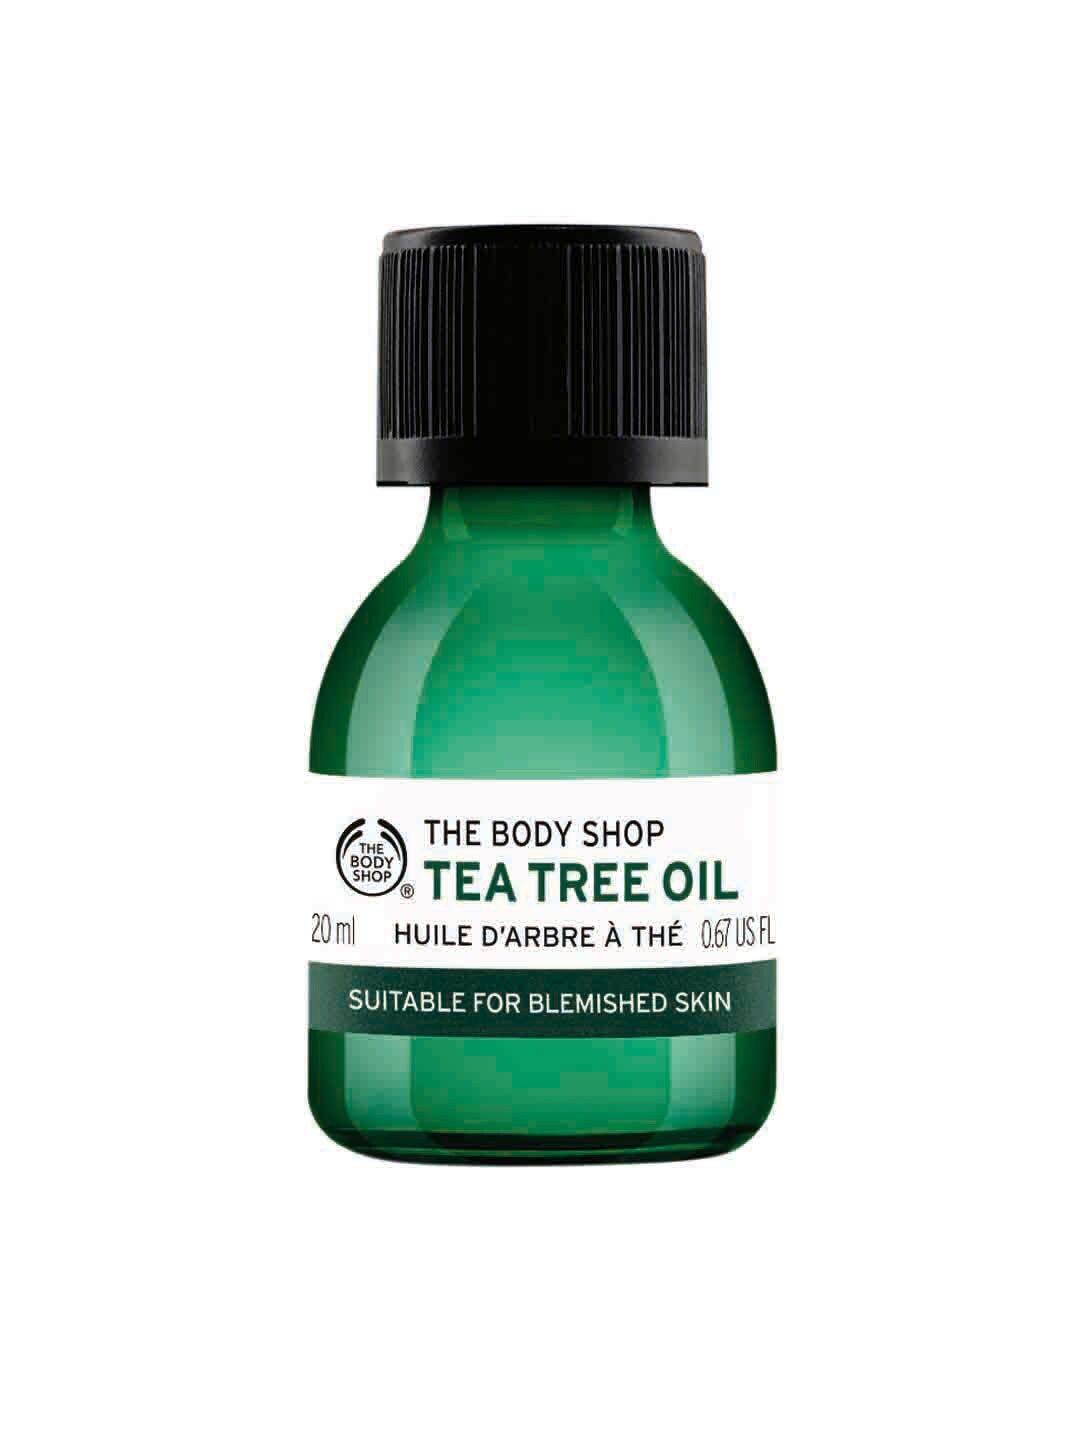 the body shop vitamin e range sustainable tea tree oil for blemished skin 20 ml